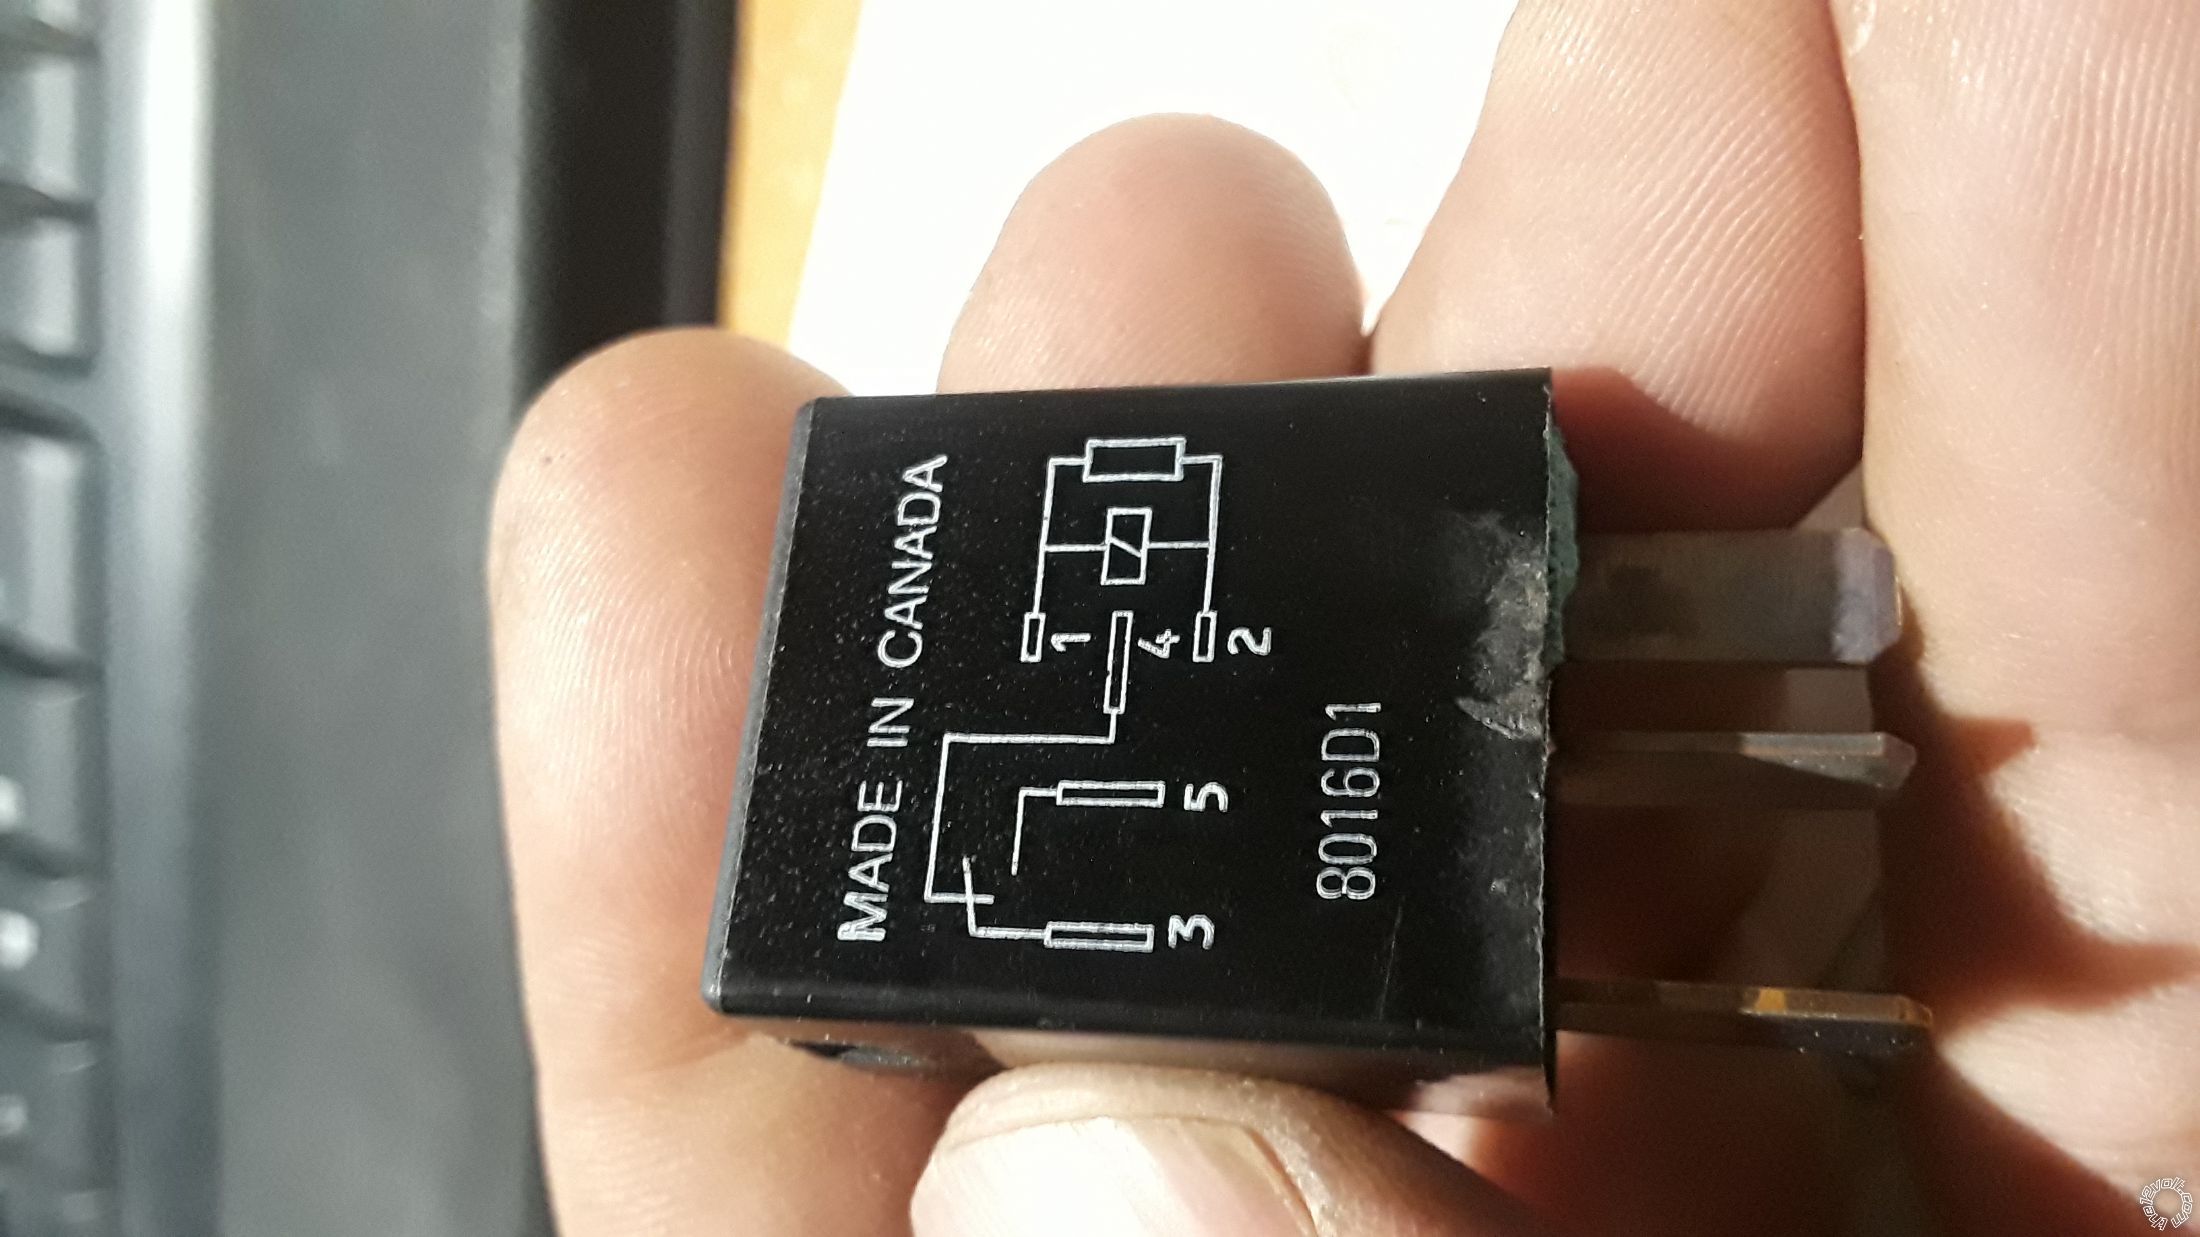 Replace G8HE-1C7T-R1-DC1 Relay with RTT7101-12V - Last Post -- posted image.